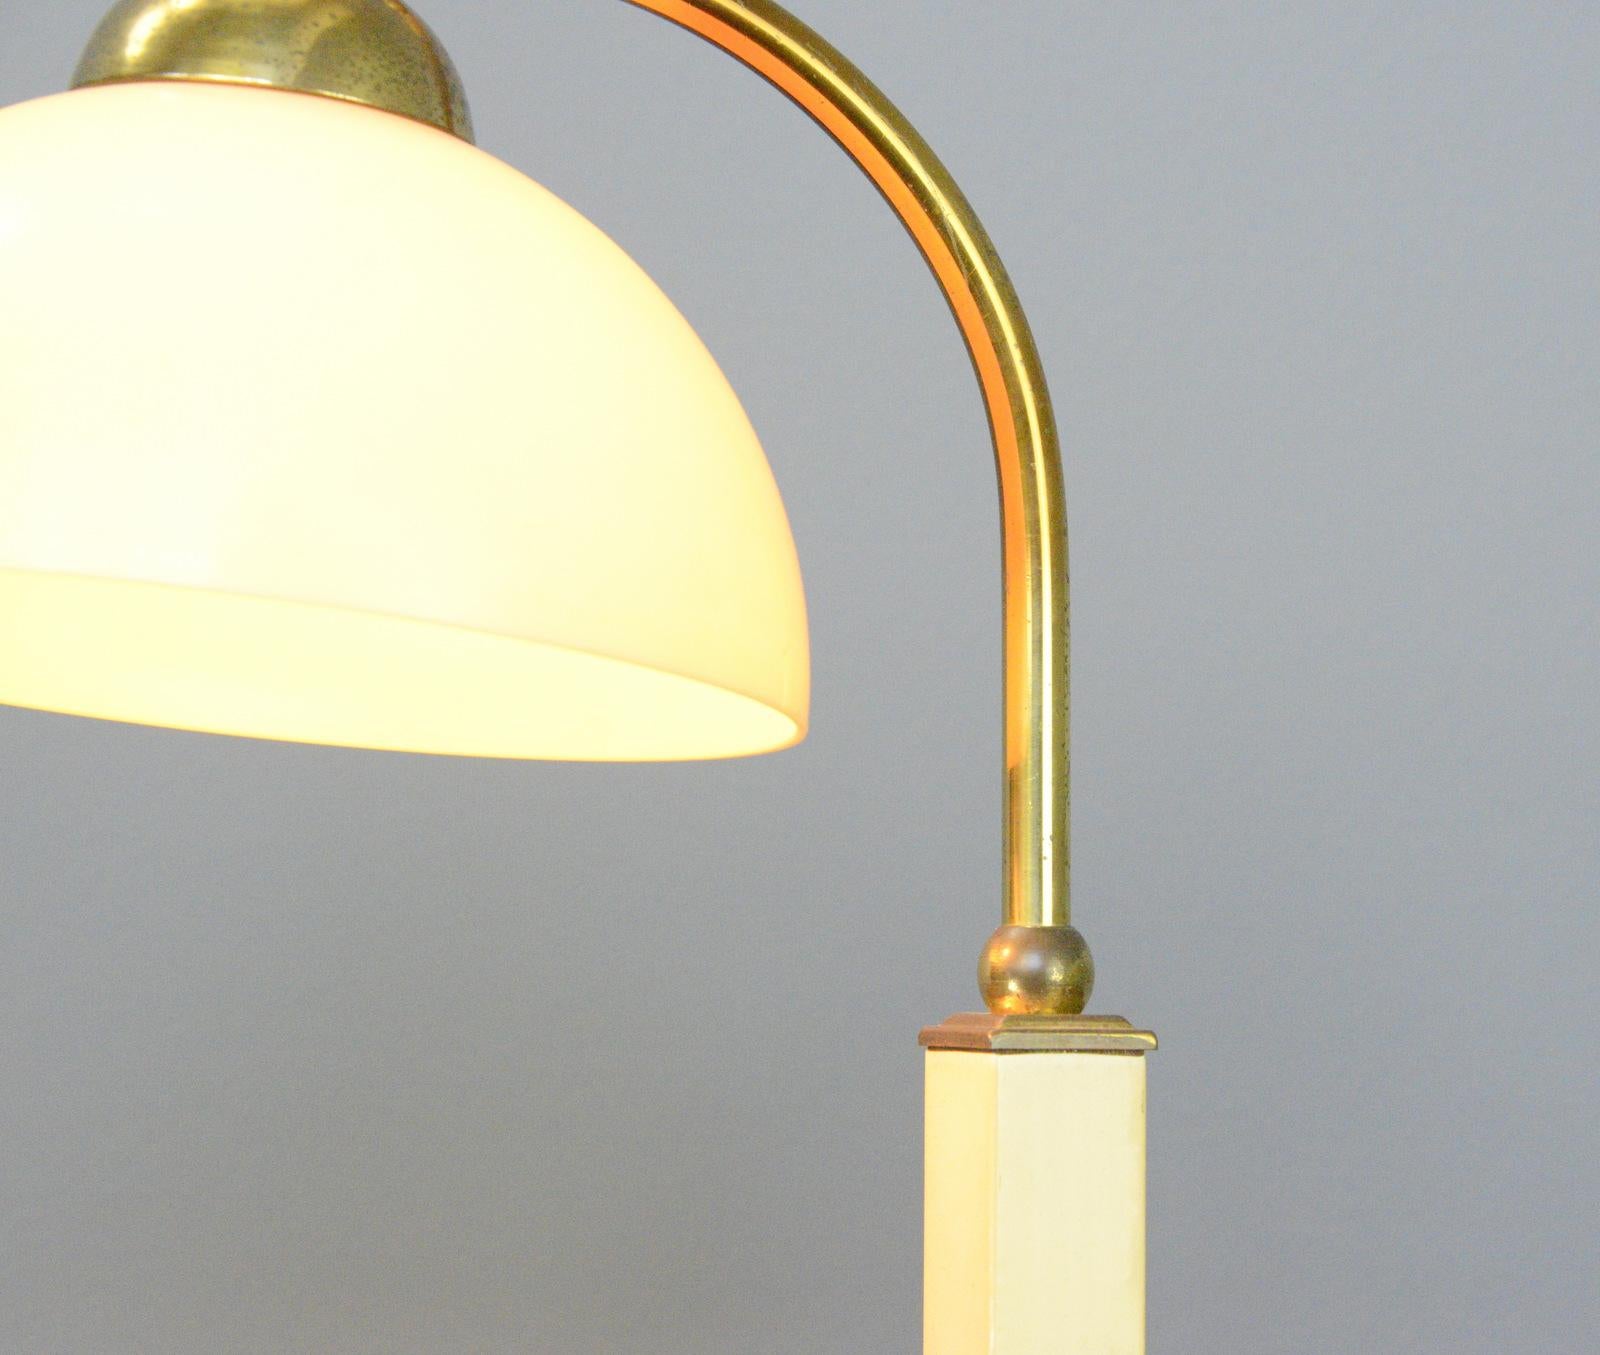 Early 20th Century German Art Deco Table Lamp Circa 1920s For Sale